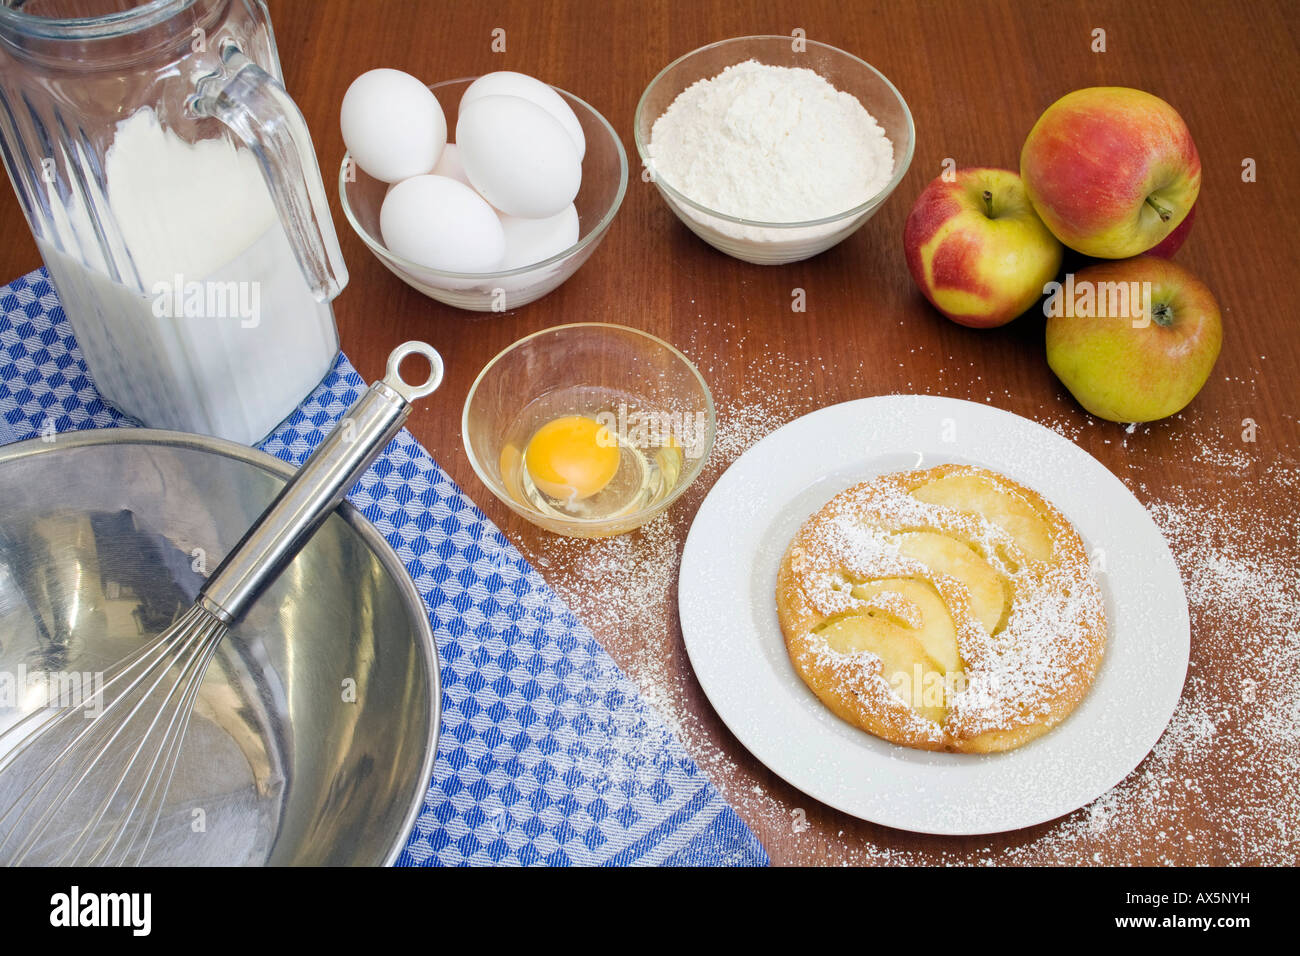 Apple pancakes surrounded by ingredients Stock Photo